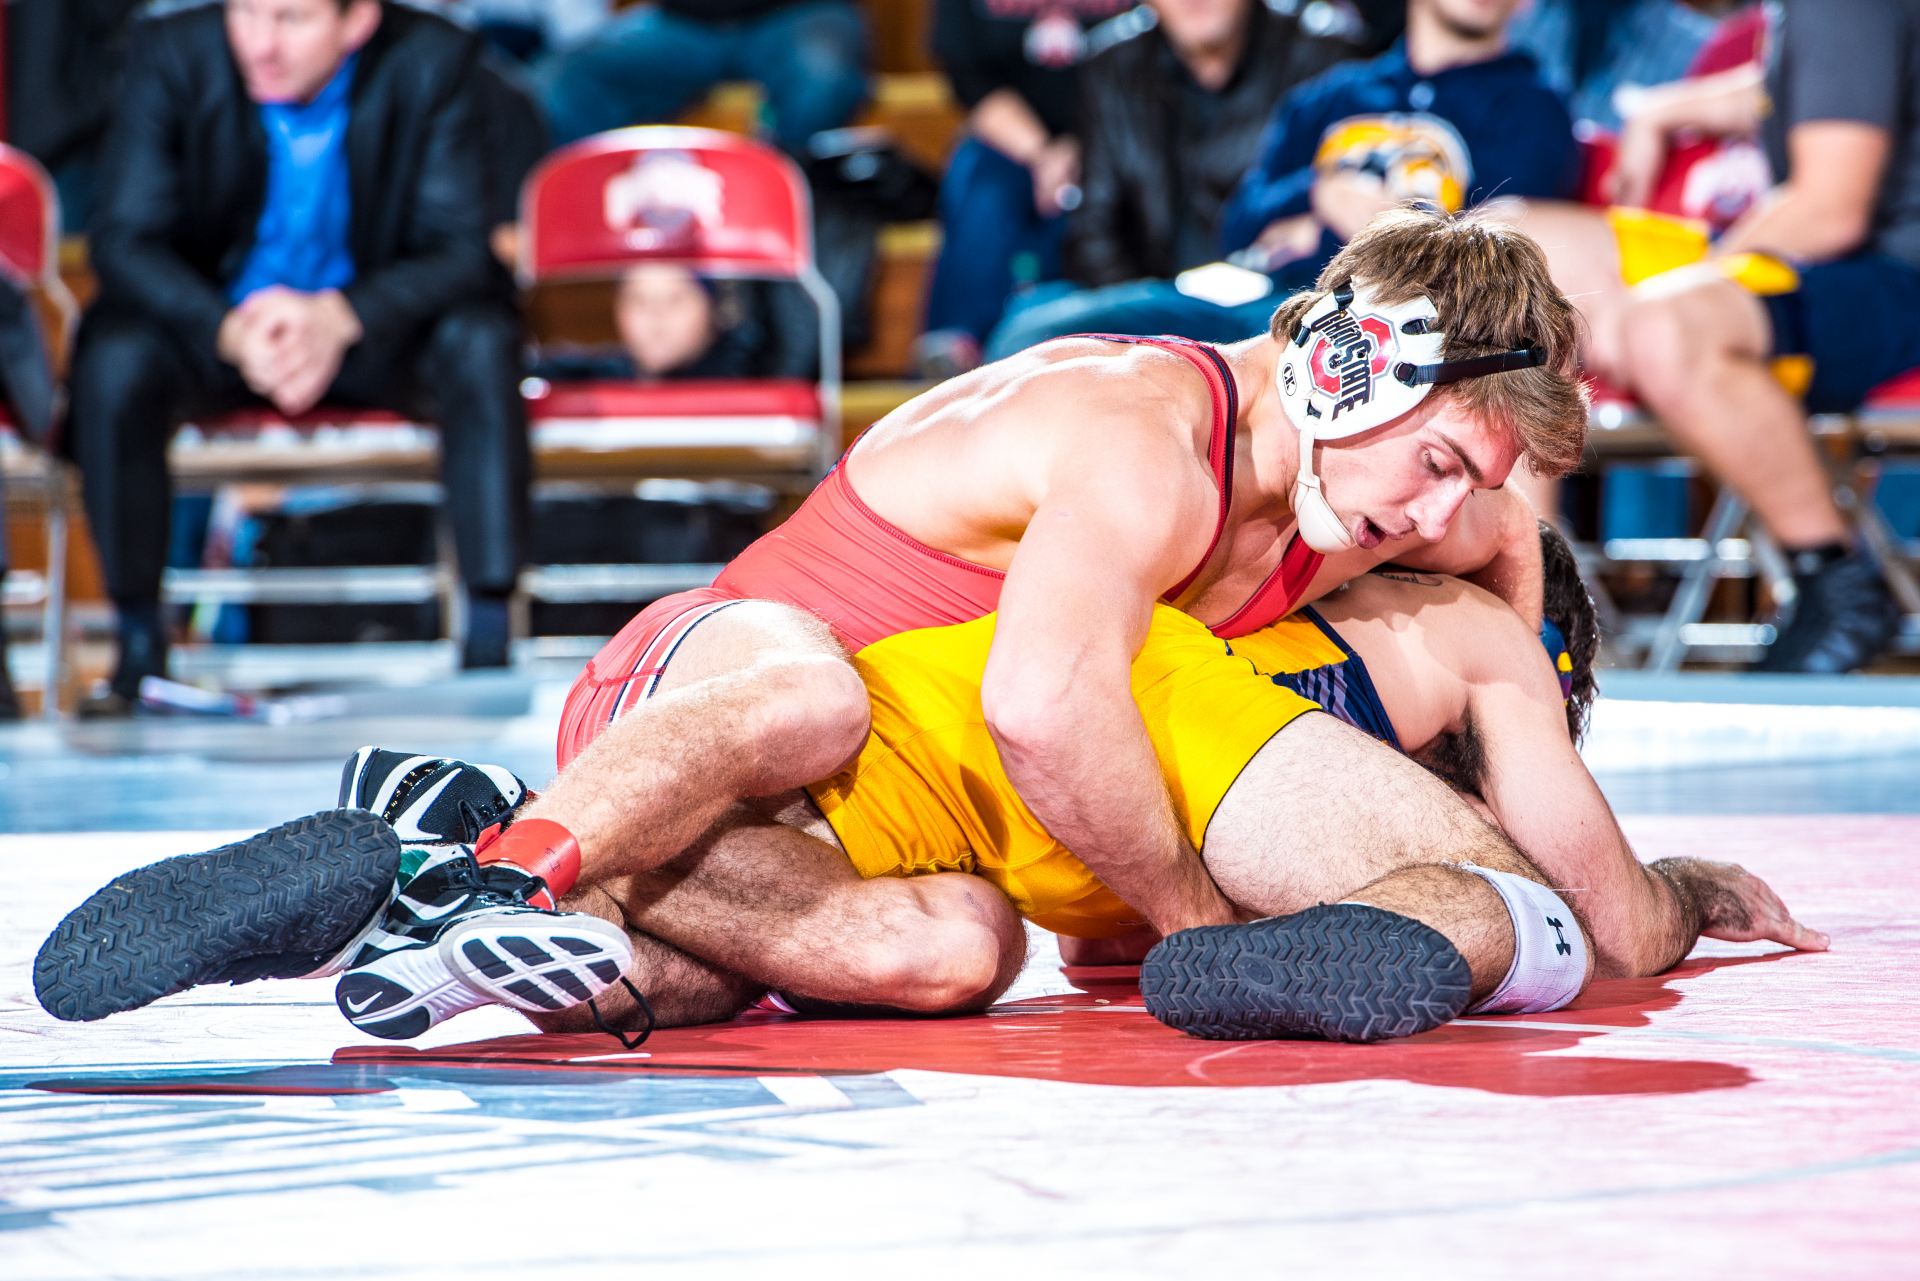 Wrestling: An inside look at competing 'unattached' as an Ohio State ...